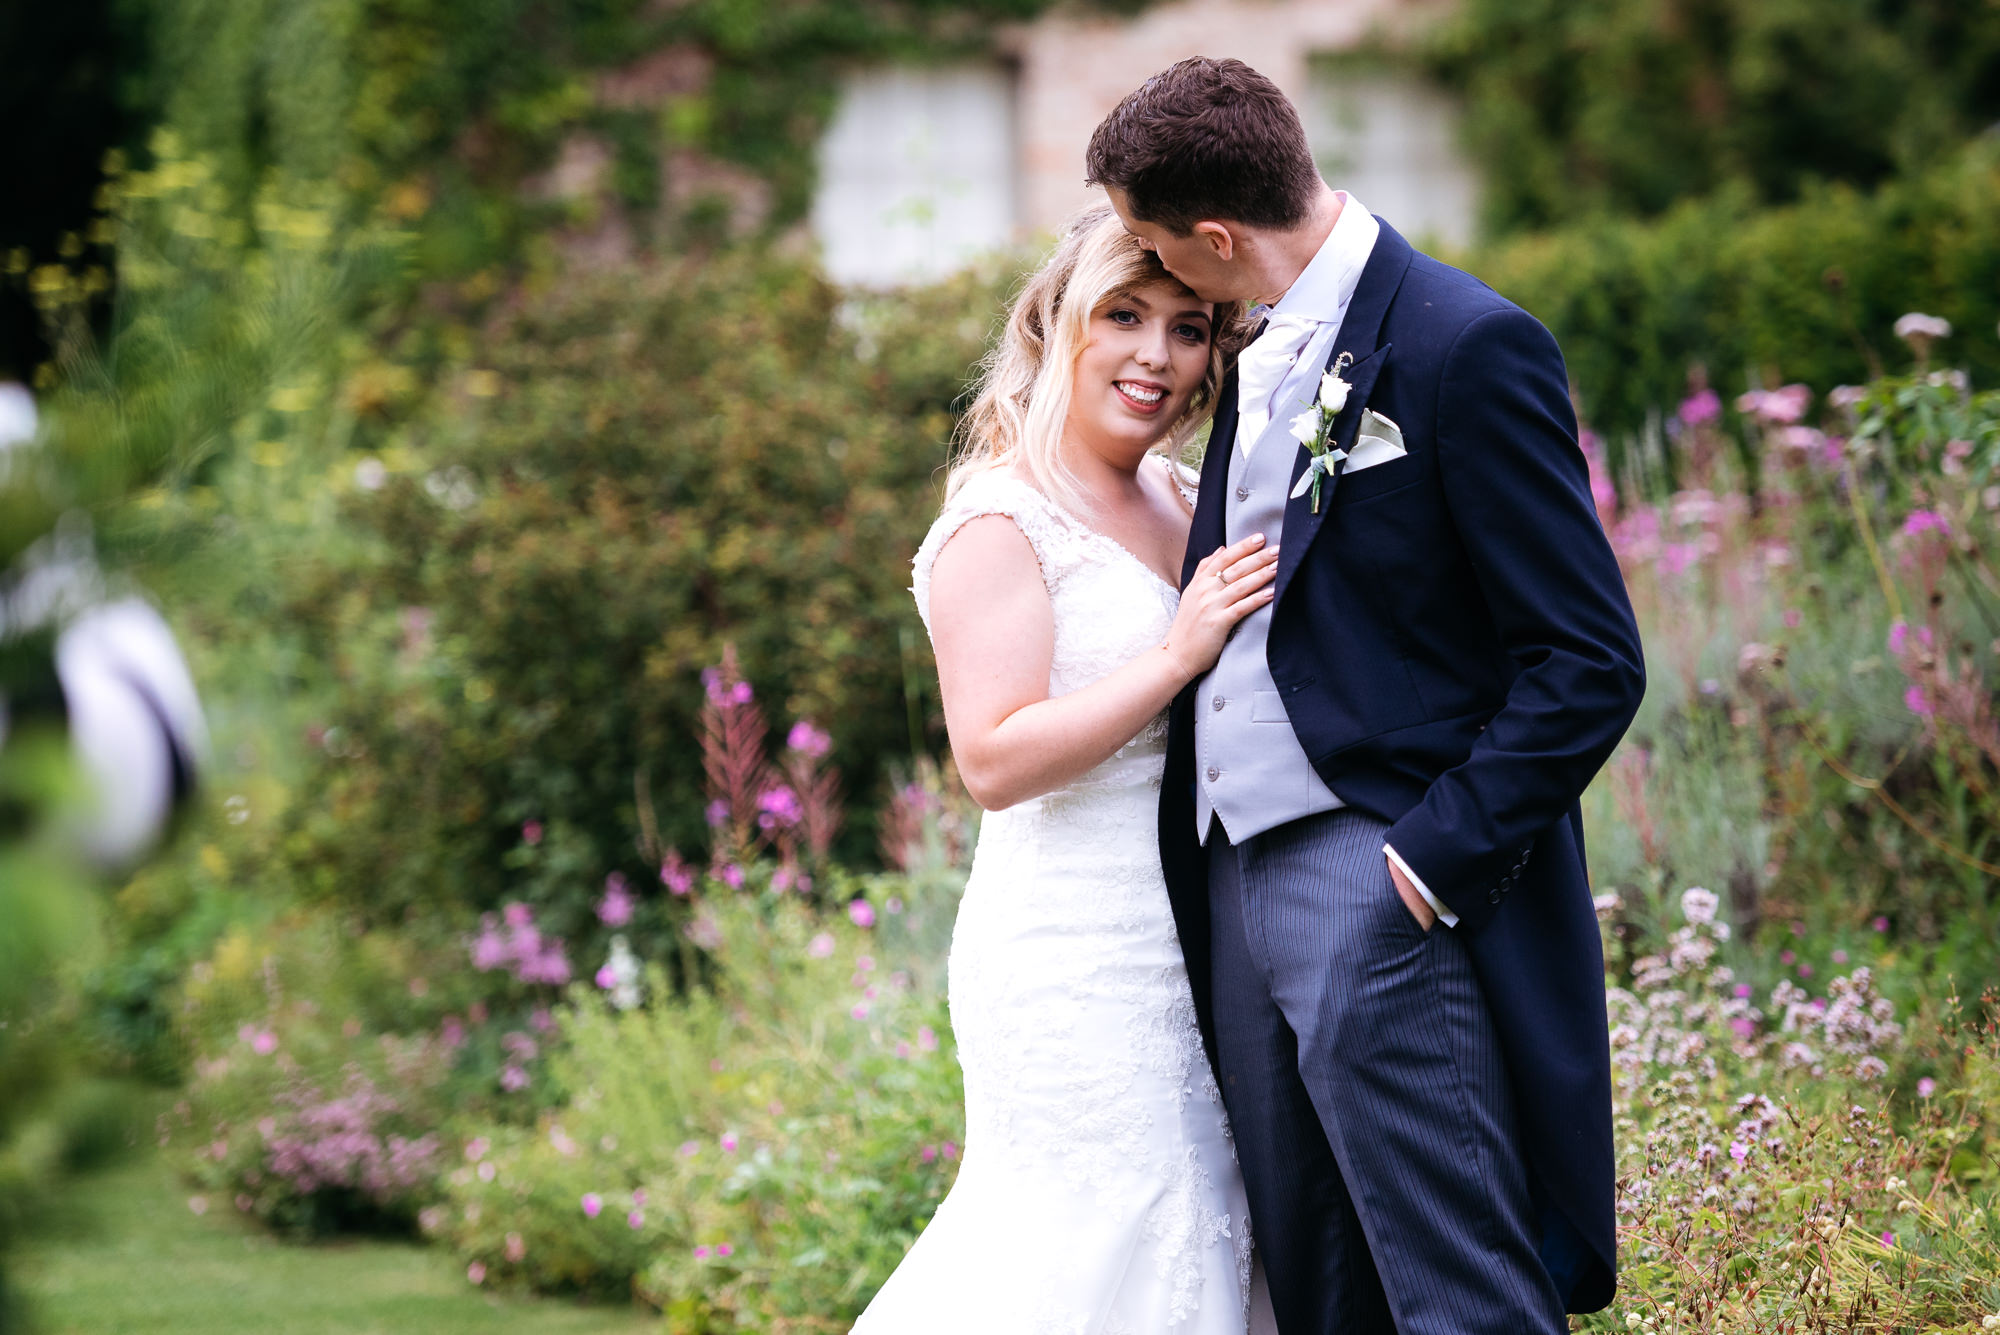 Bride and groom at Narborough Hall Gardens wedding